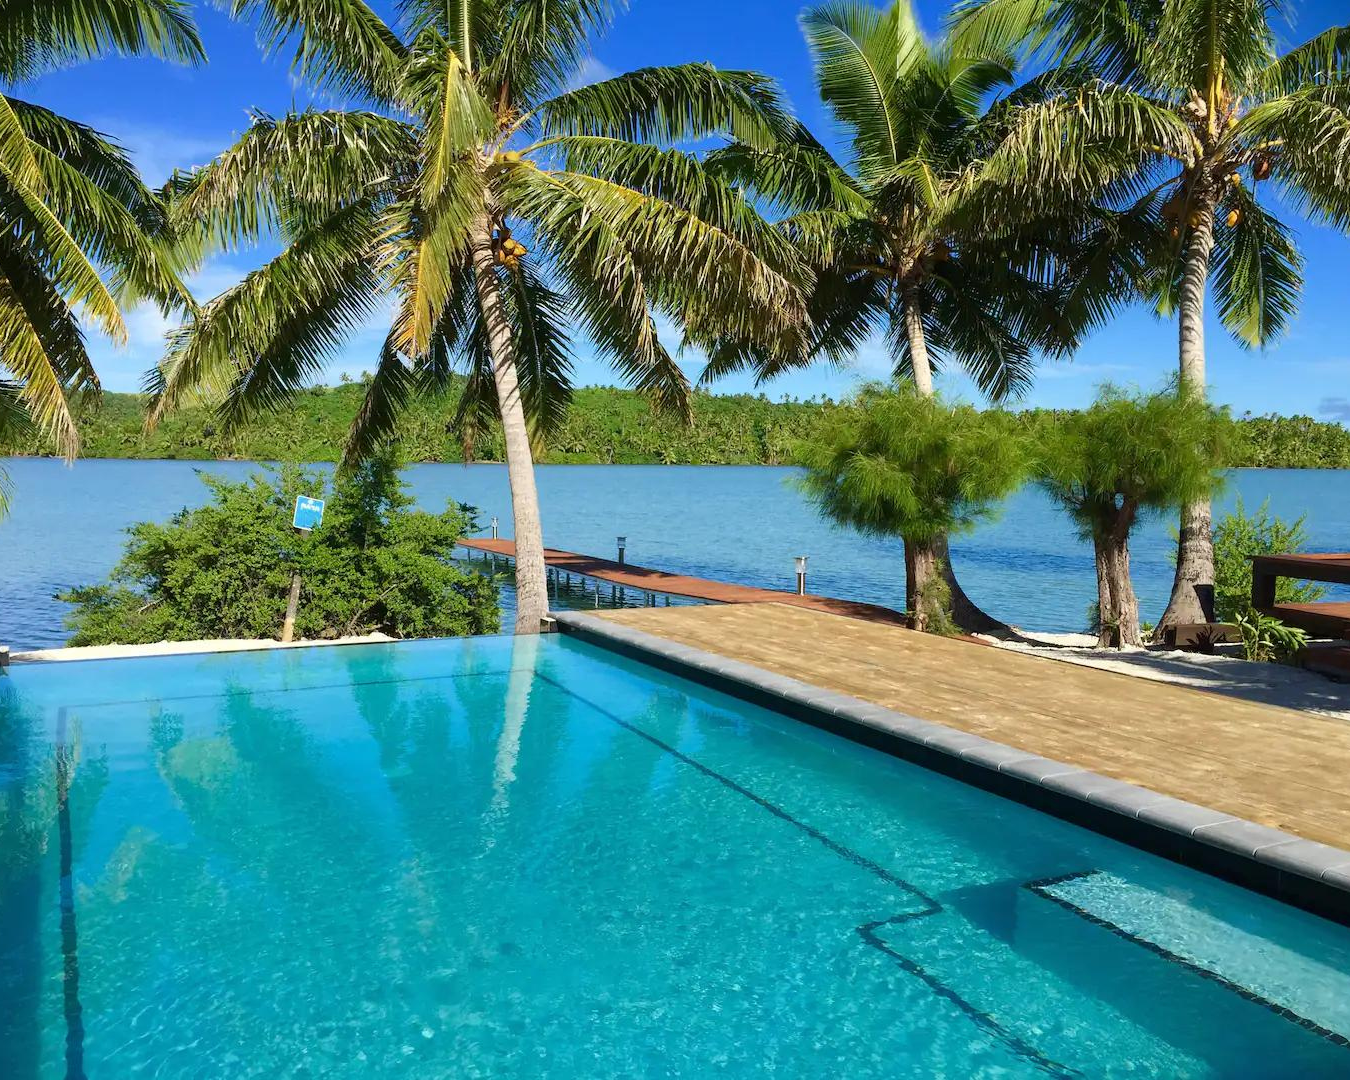 An infinity pool drops over the edge surrounded by palm trees.